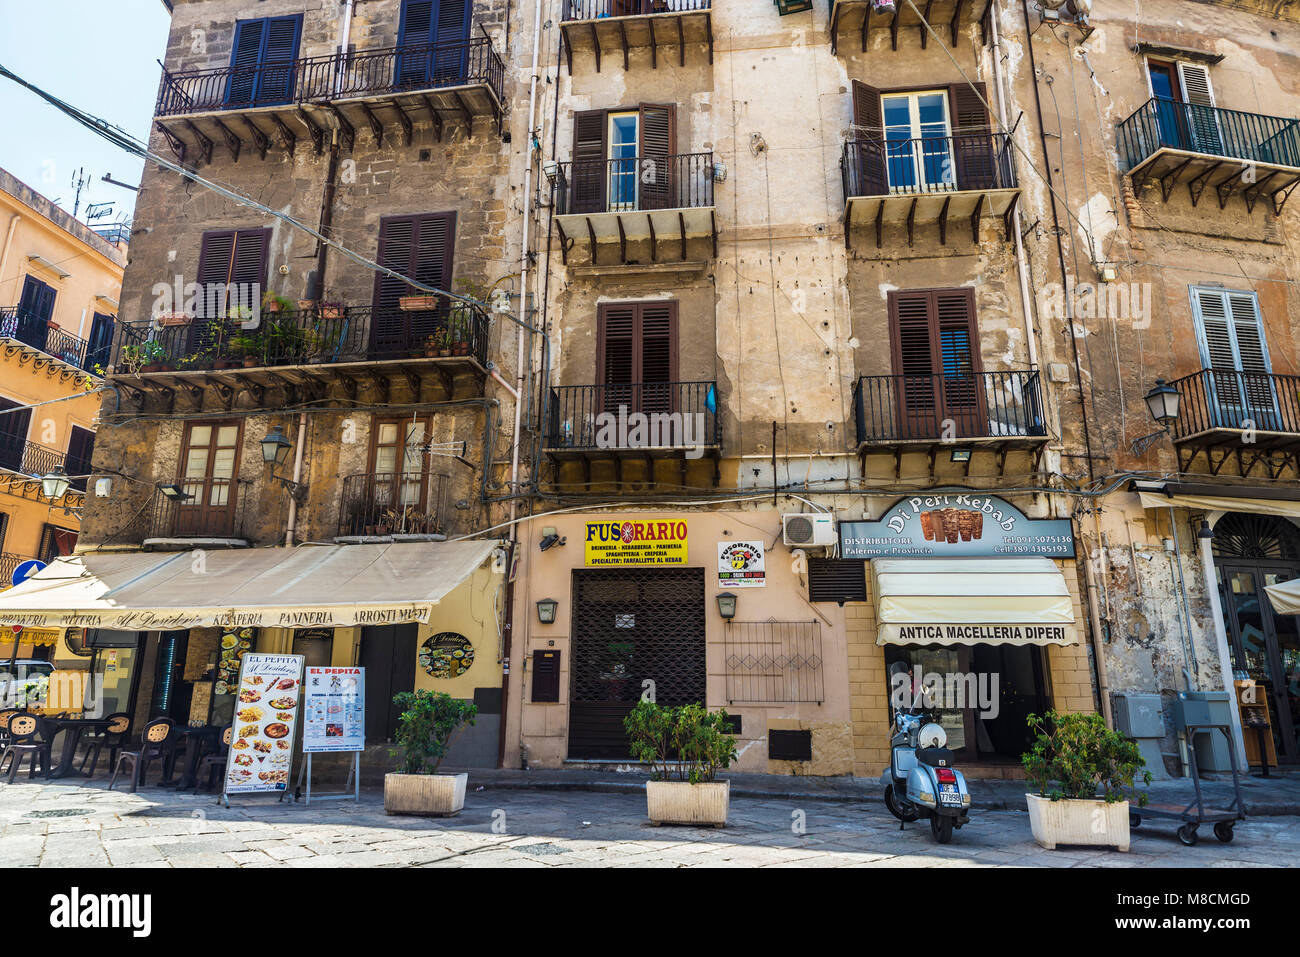 Palermo, Italy - August 10, 2017: Terrace of a restaurant bar in the old town of Palermo in Sicily, Italy Stock Photo